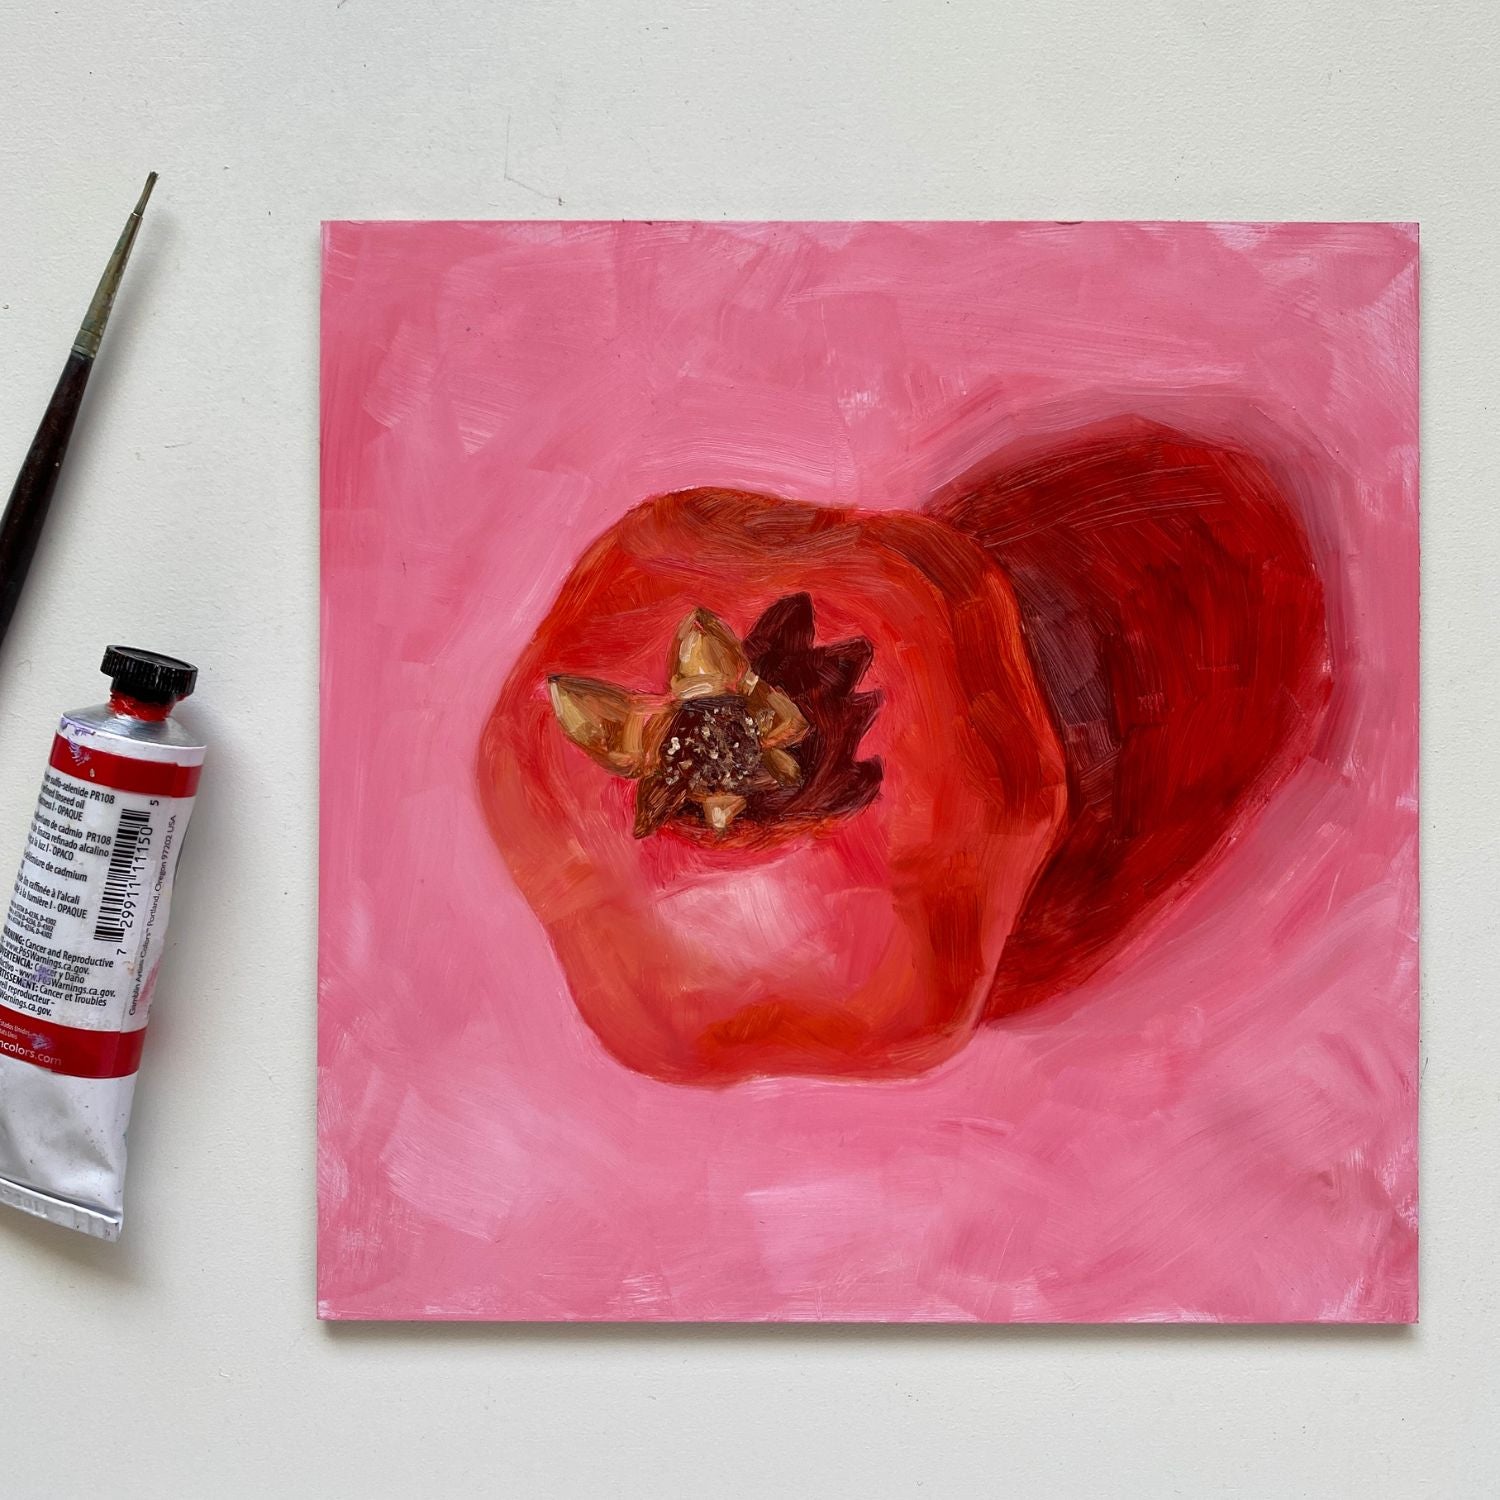 lifestyle photo of an original oil painting of a bright and vibrant red pomegranate with a strong reddish shadow on a textured pink background. the painting is on a white desk and there is a paintbrush and oil paint tube next to it